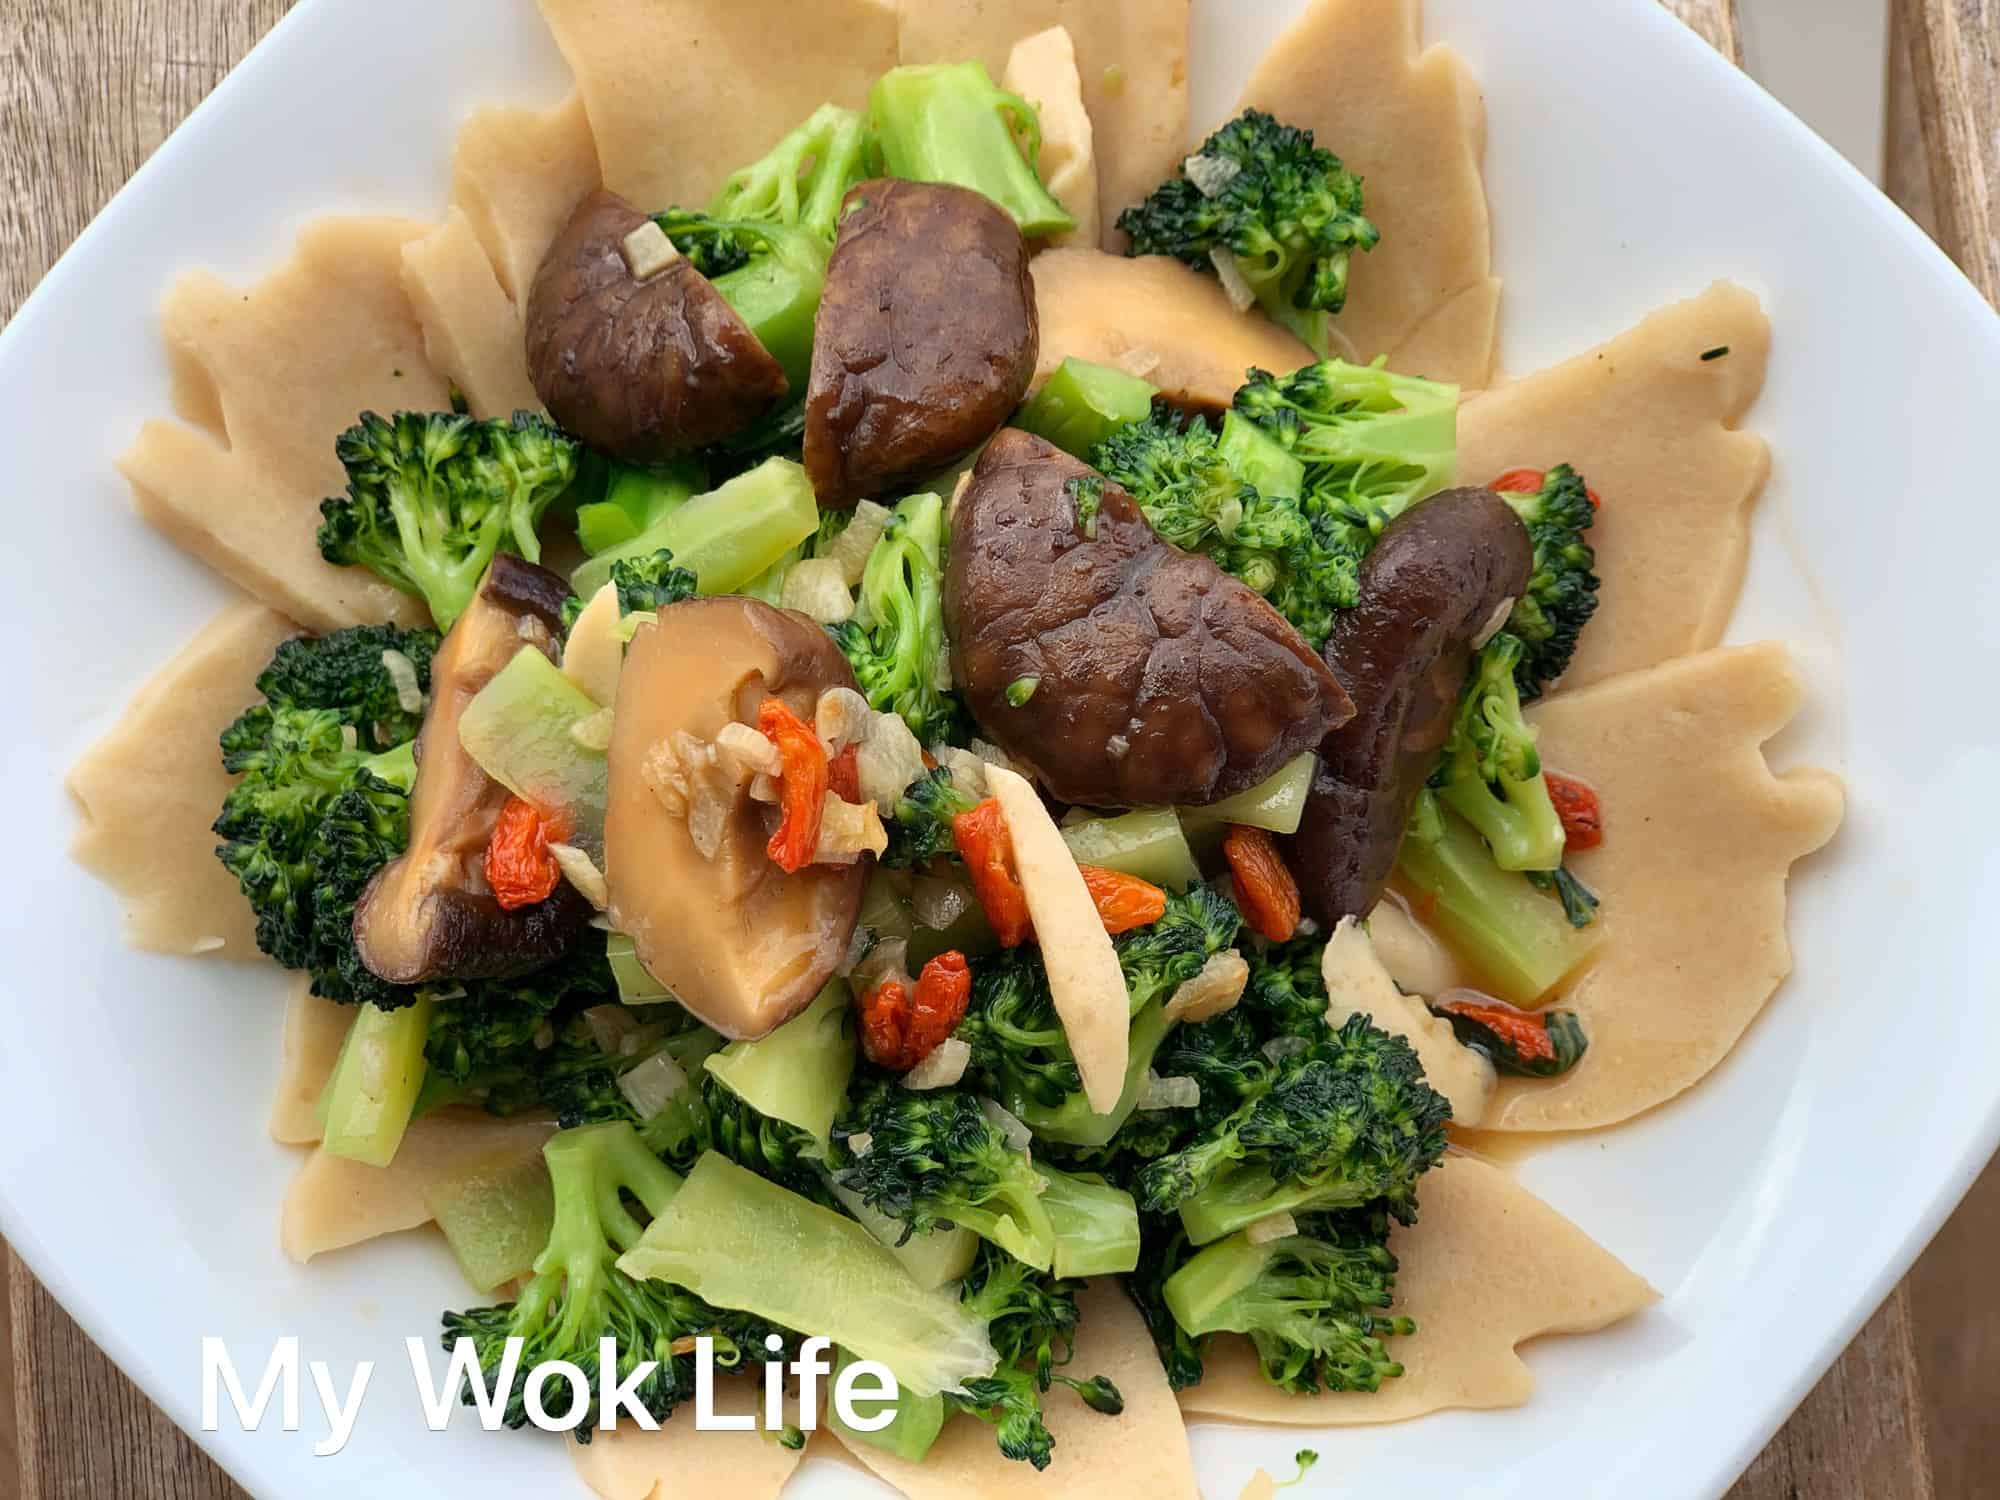 My Wok Life Cooking Blog Stir-fried Broccoli with Vegetarian Mock Abalone